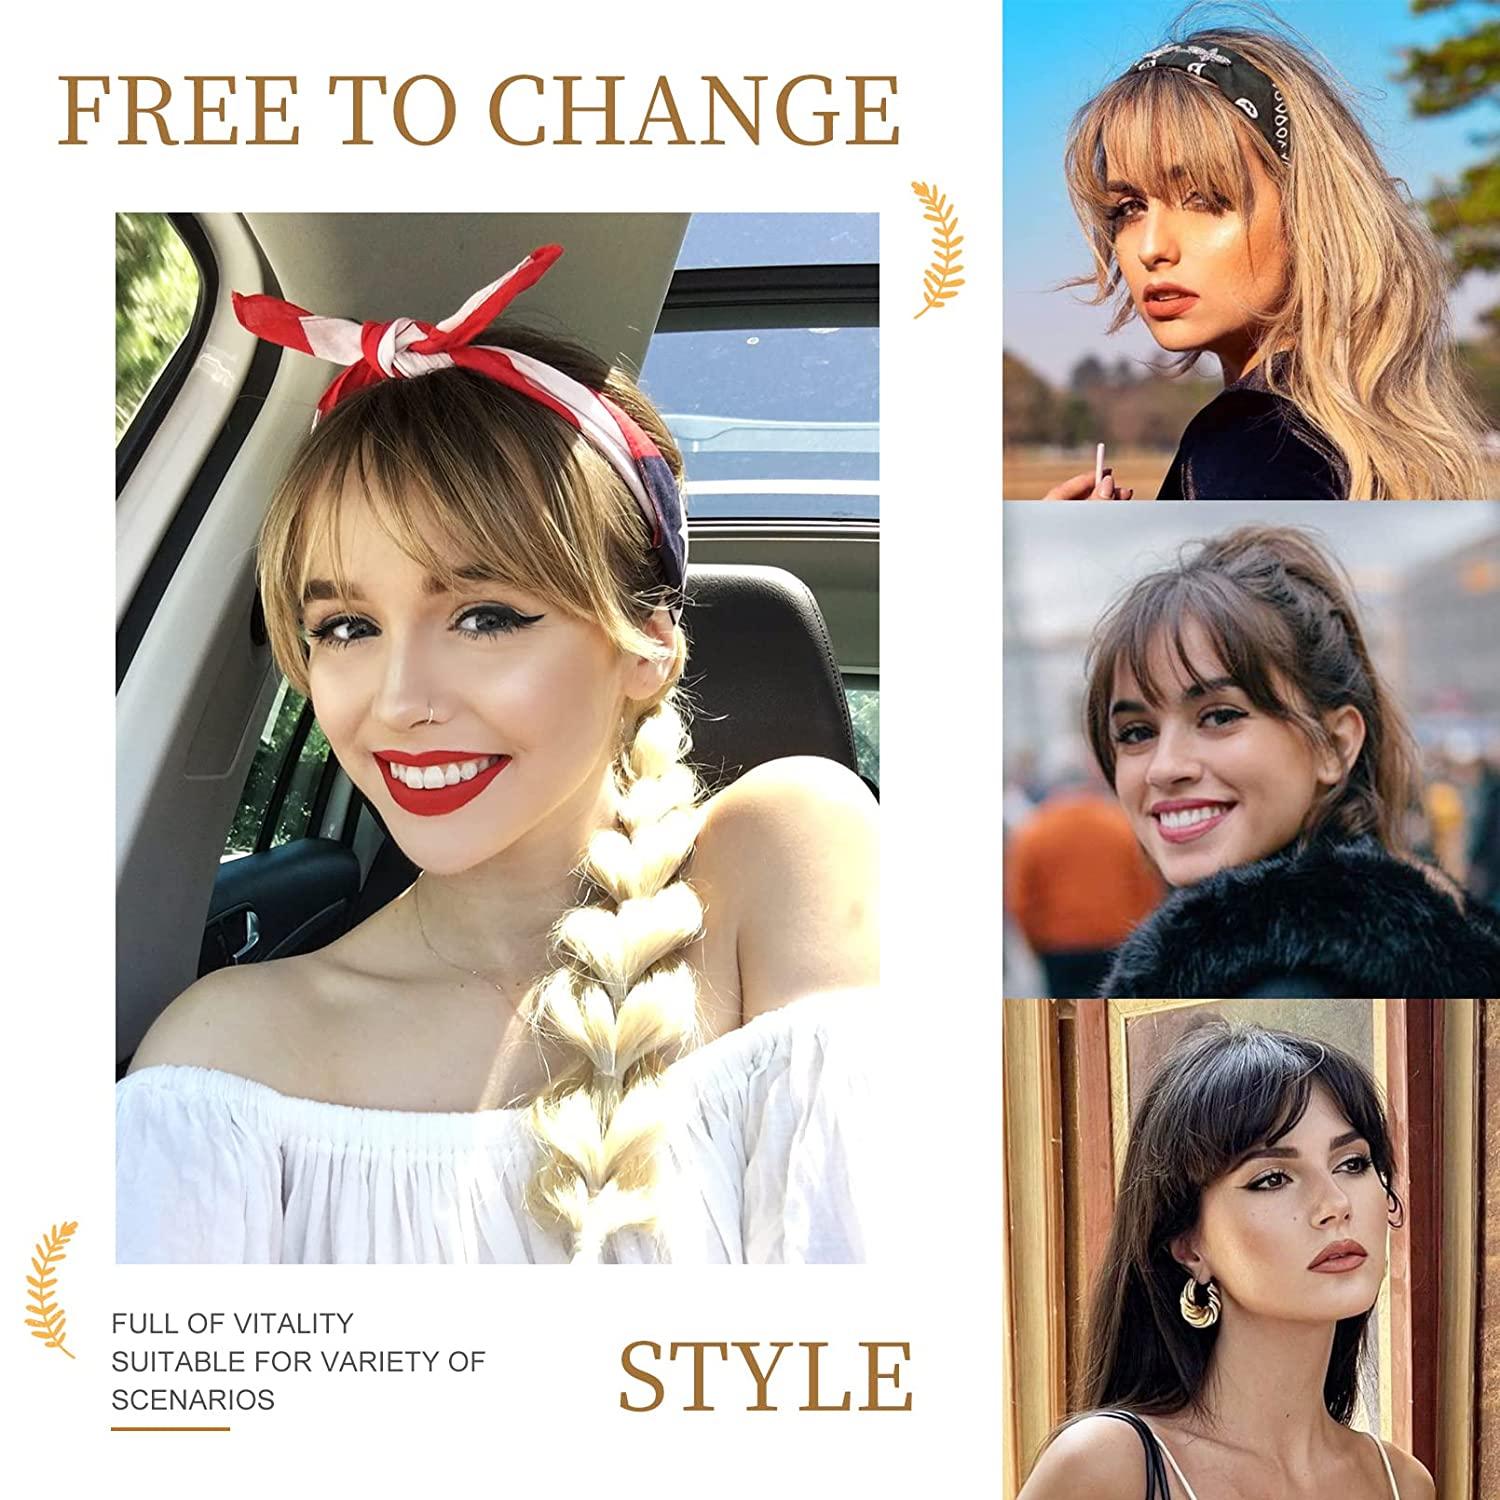 Amazon.com : ICRAB Afro Kinly Curly Bangs Clip in Hair Extensions Natural Fake  Fringe Bangs Short Curly Human Hair Bangs Clip on Hair Piece Jerry Curly Fringe  Hair 4# Dark Brown Color :